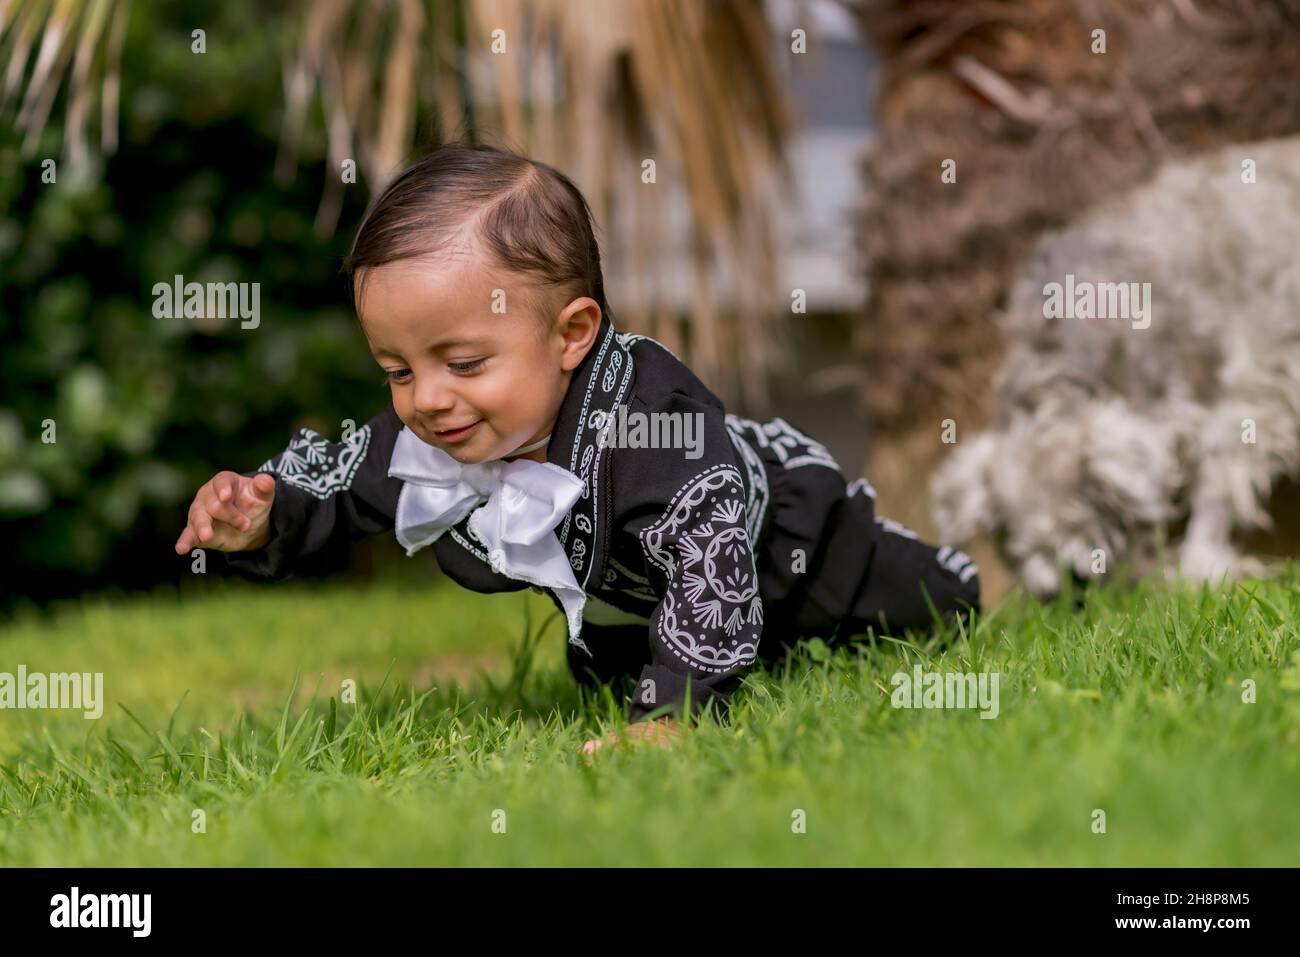 Cute Latin baby boy with a mariachi costume crawling on the grass Stock Photo